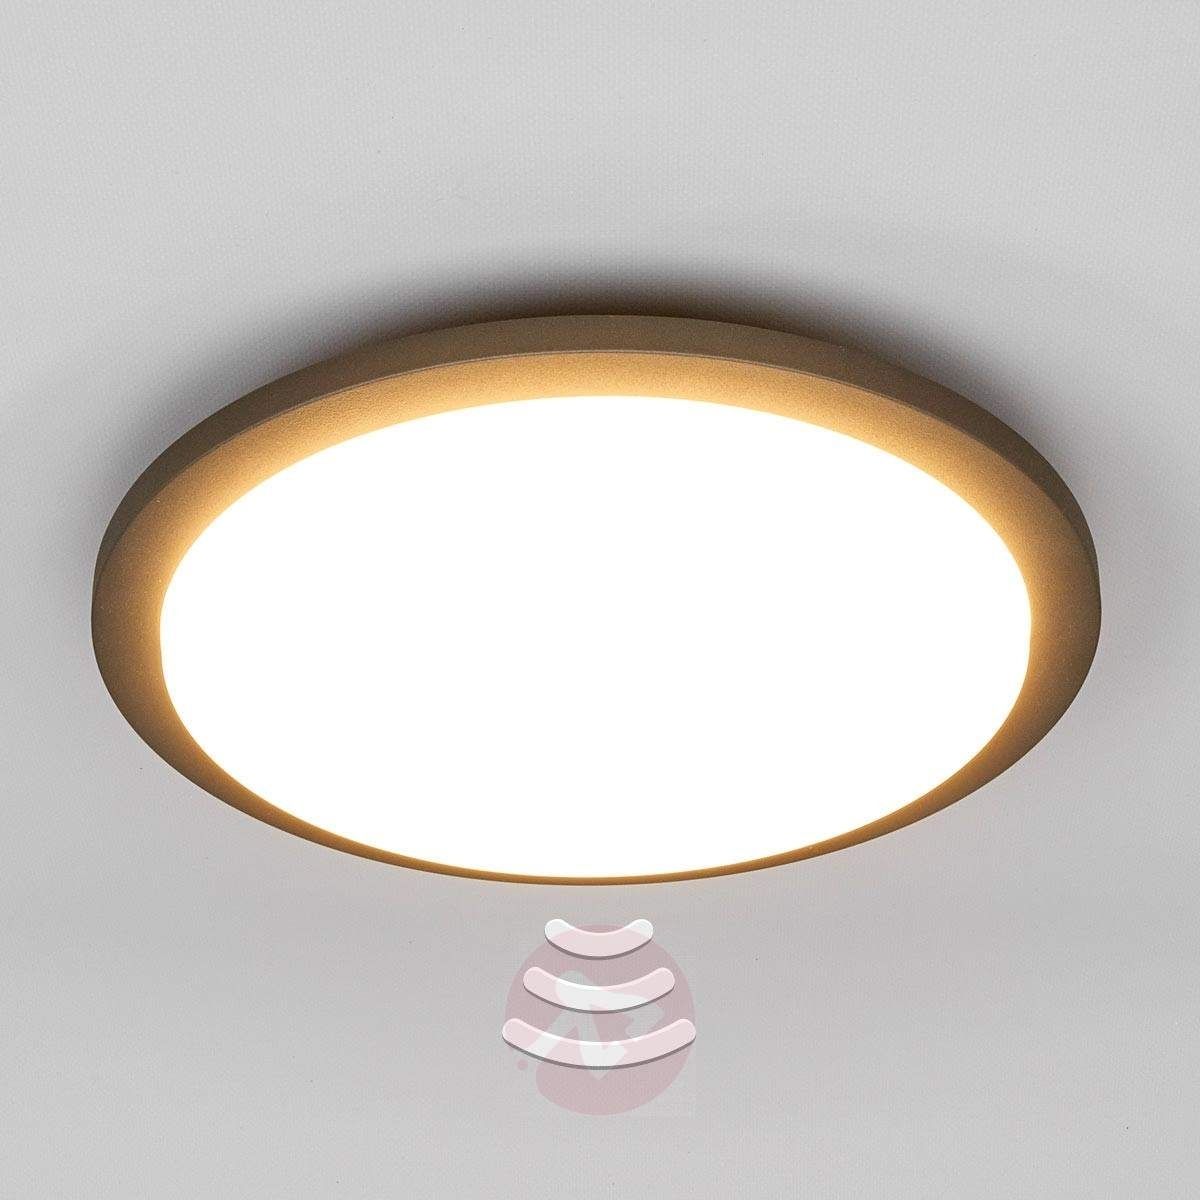 Benton – Led Outdoor Ceiling Light With Sensor | Lights.co (View 5 of 15)